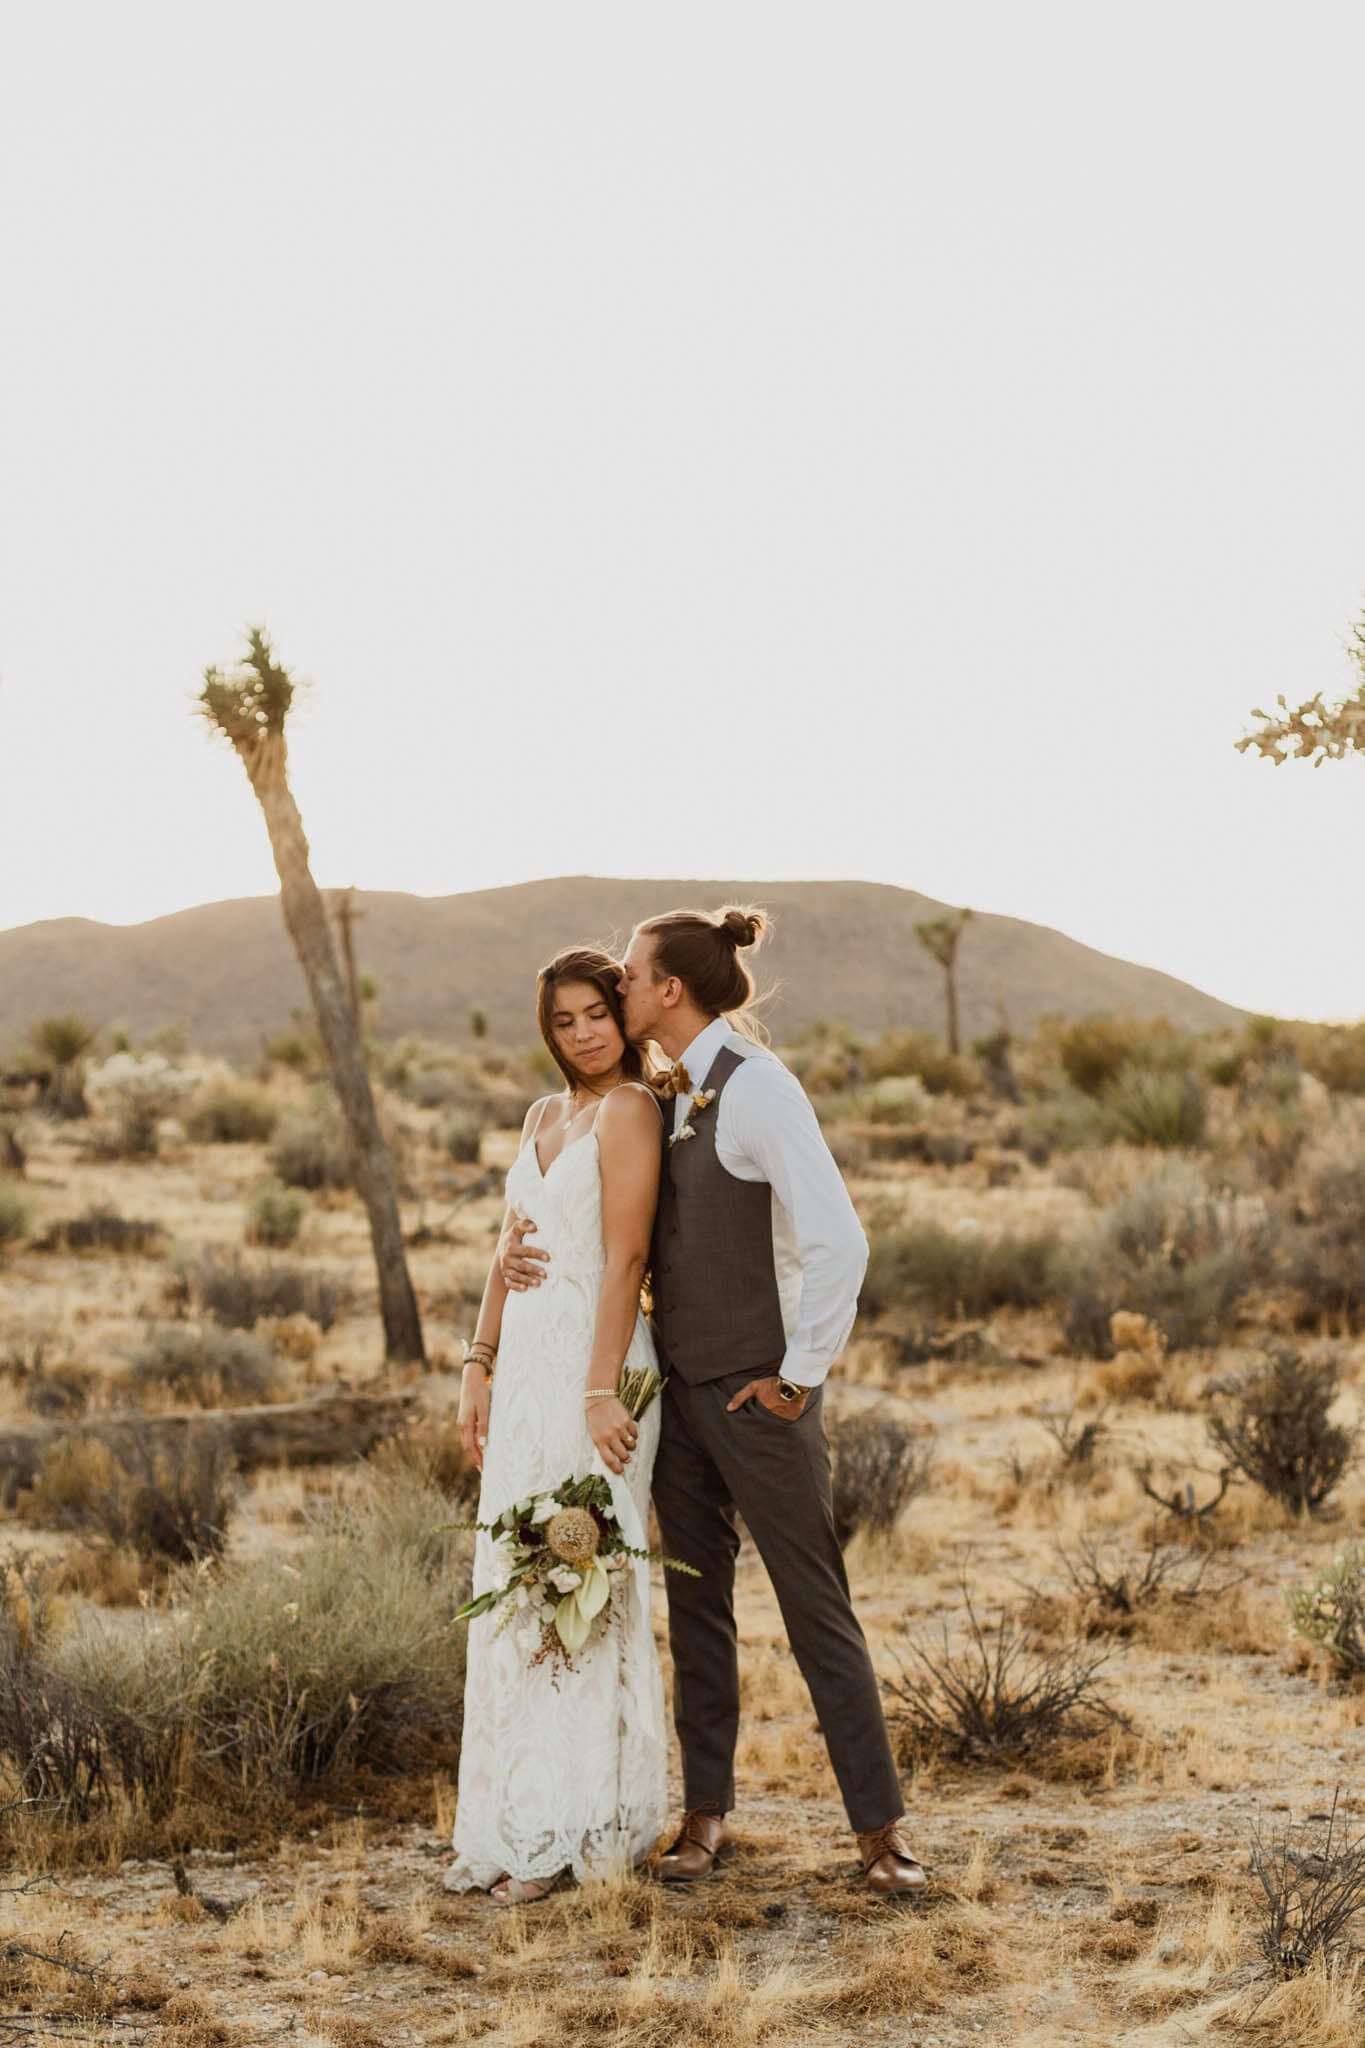 Michael and Alissa share a tender moment after deciding to elope in Joshua Tree National Park.